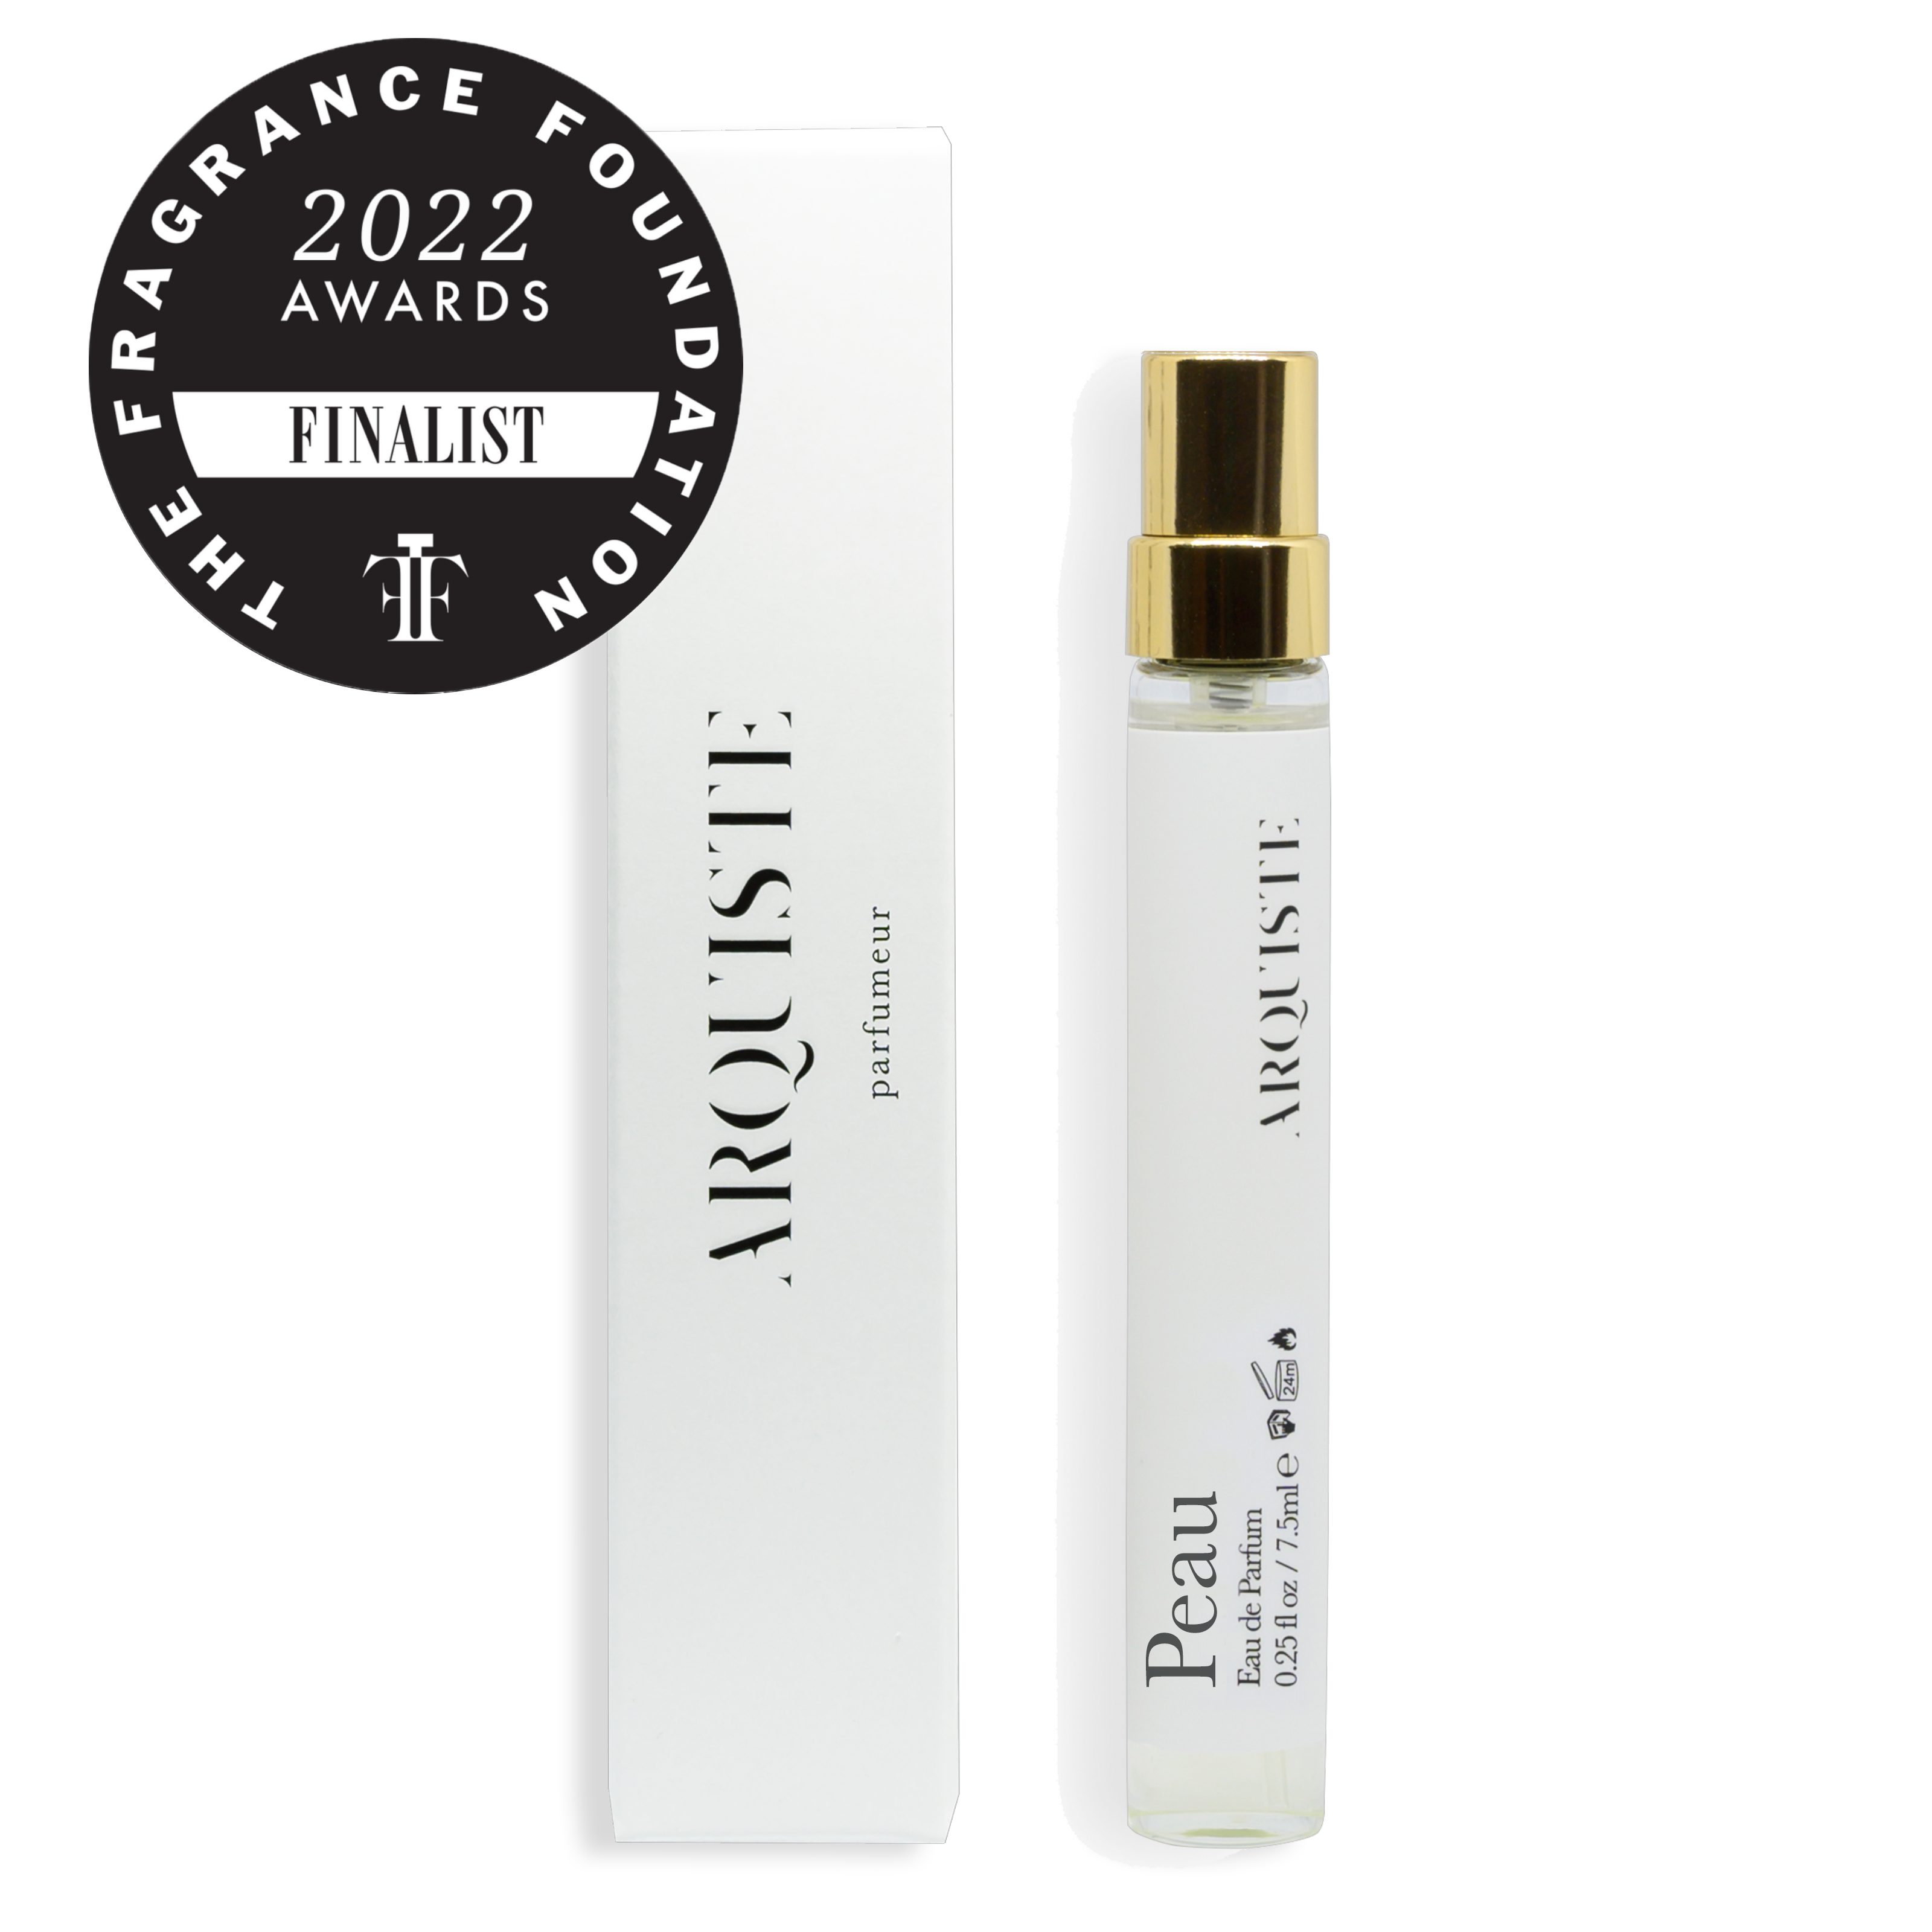 Peau Arquiste perfume - a fragrance for women and men 2021